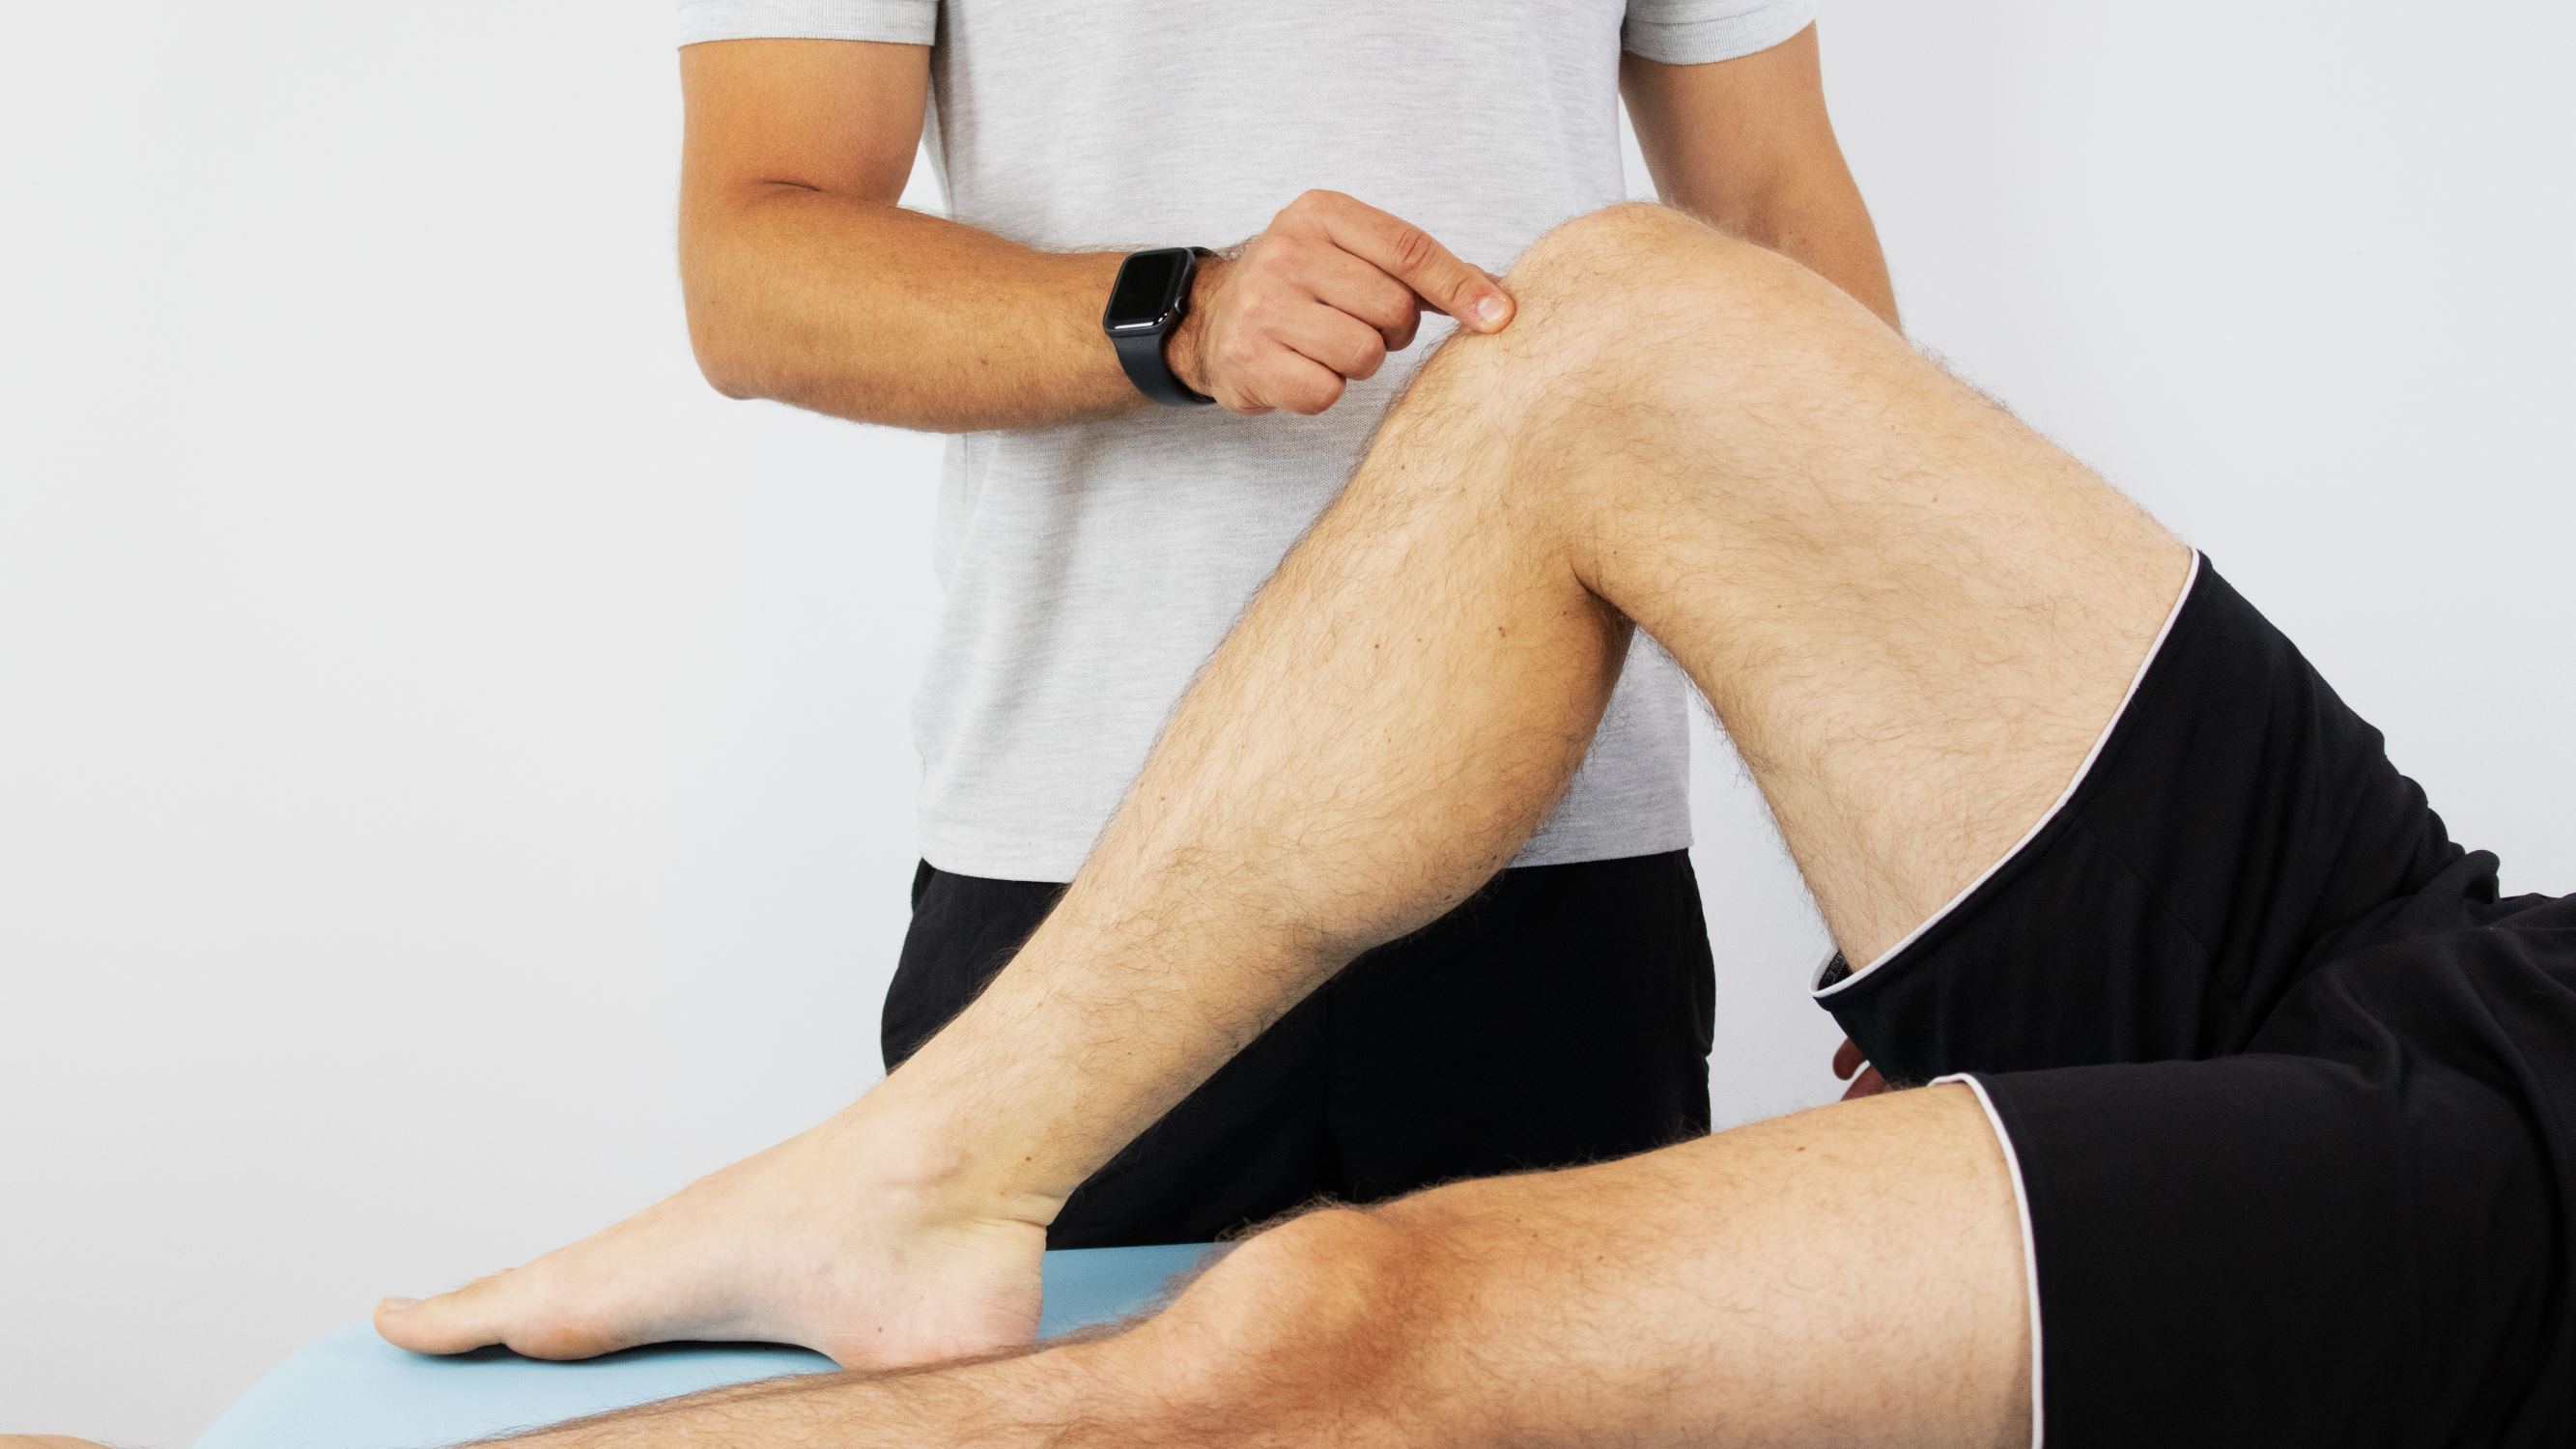 All You Need To Know About Patellar Tendinopathy